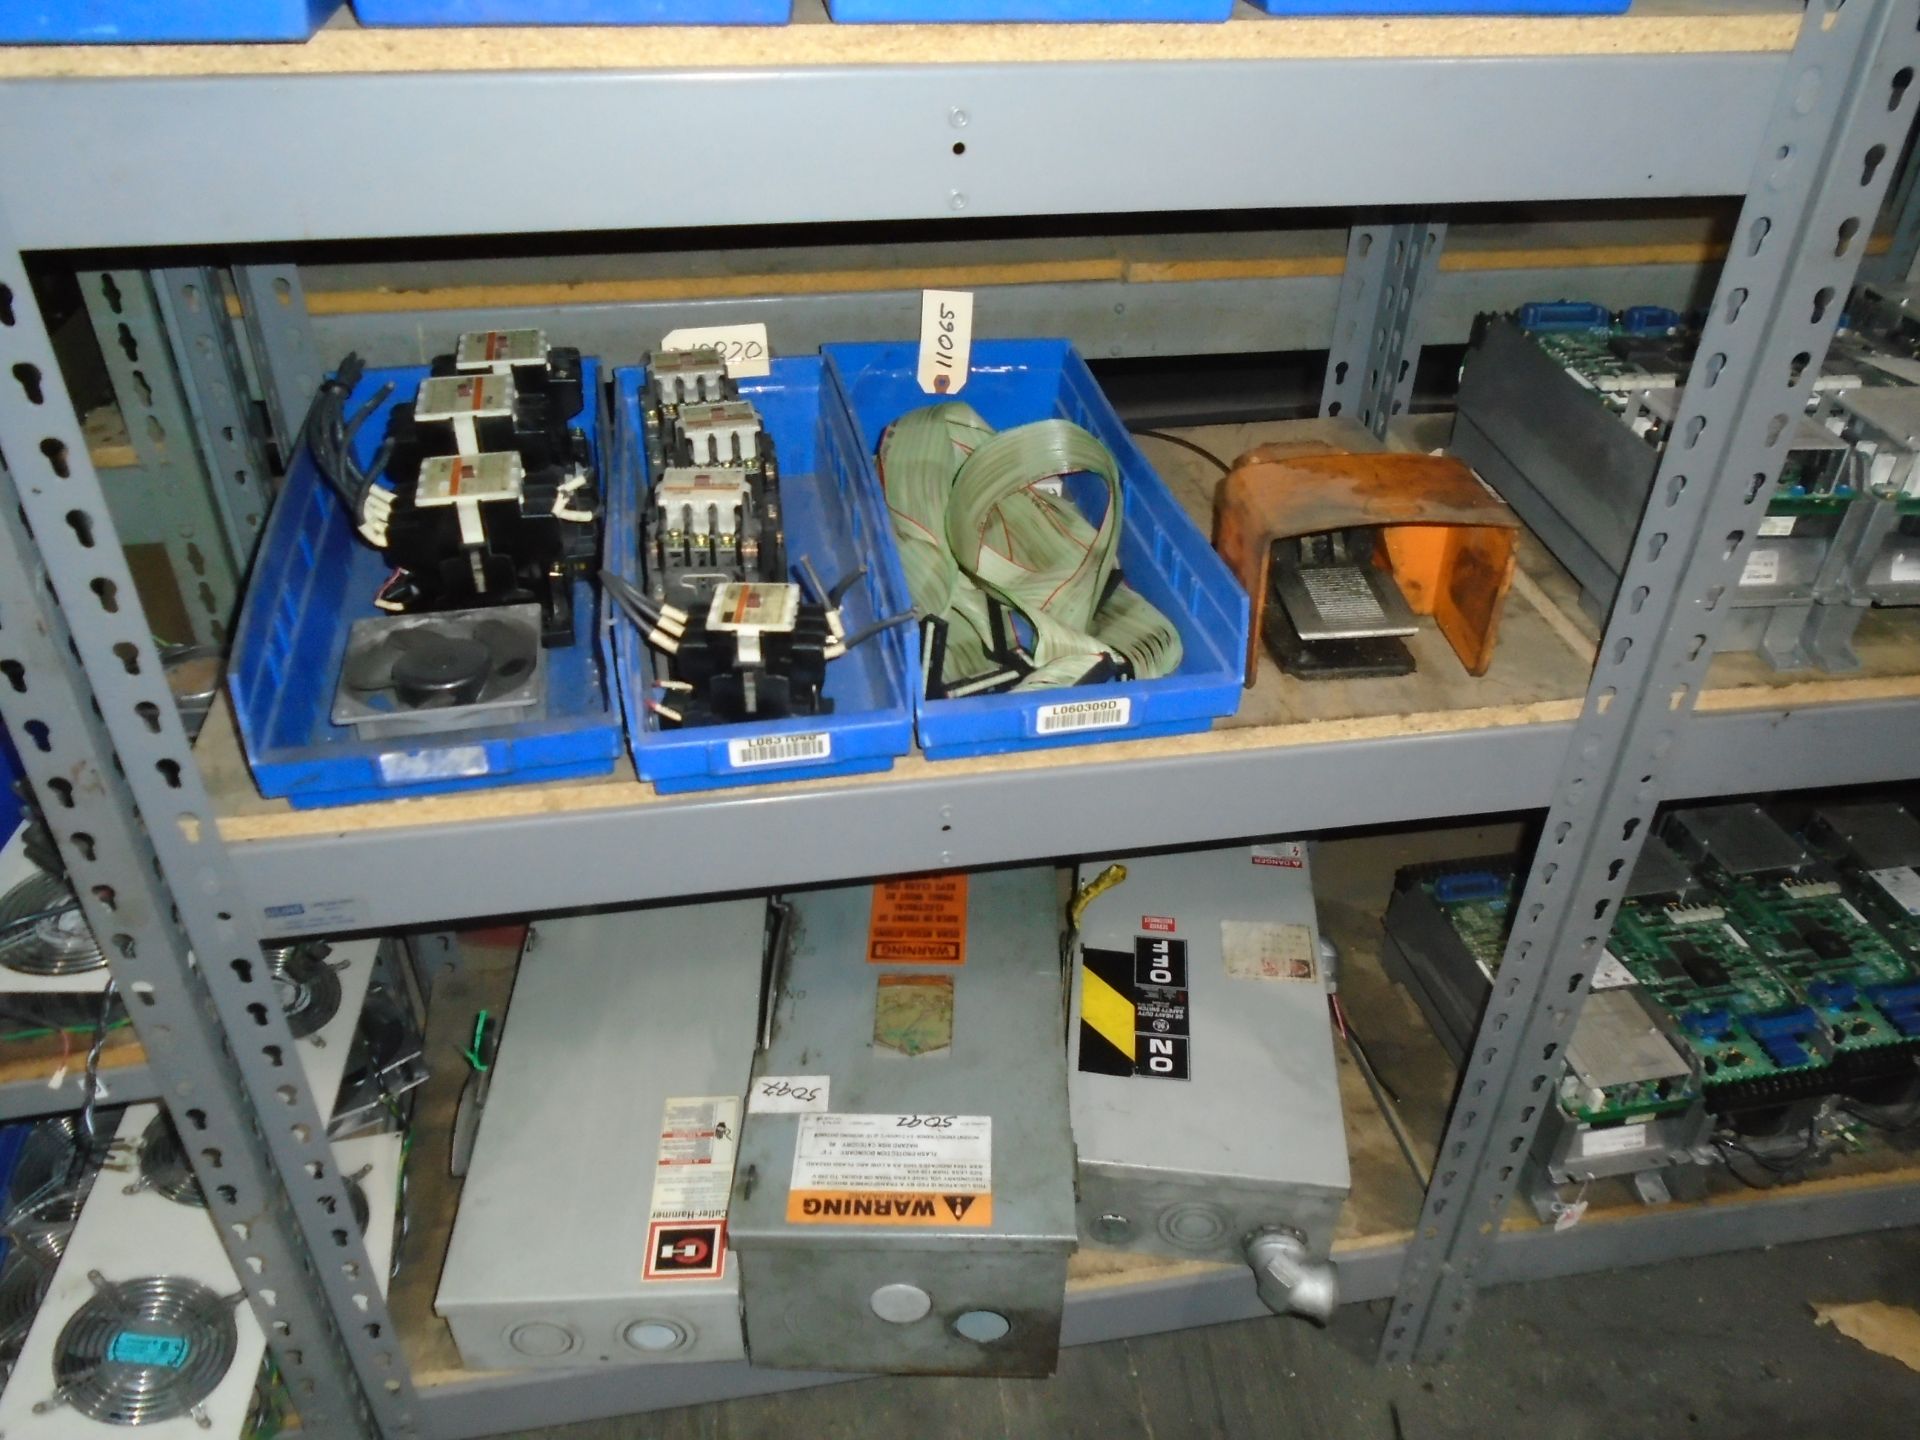 Electrical Components, Staters, Timers, Switches, Disconnecting Boxes For CNC Lathe & Mills - Image 4 of 12